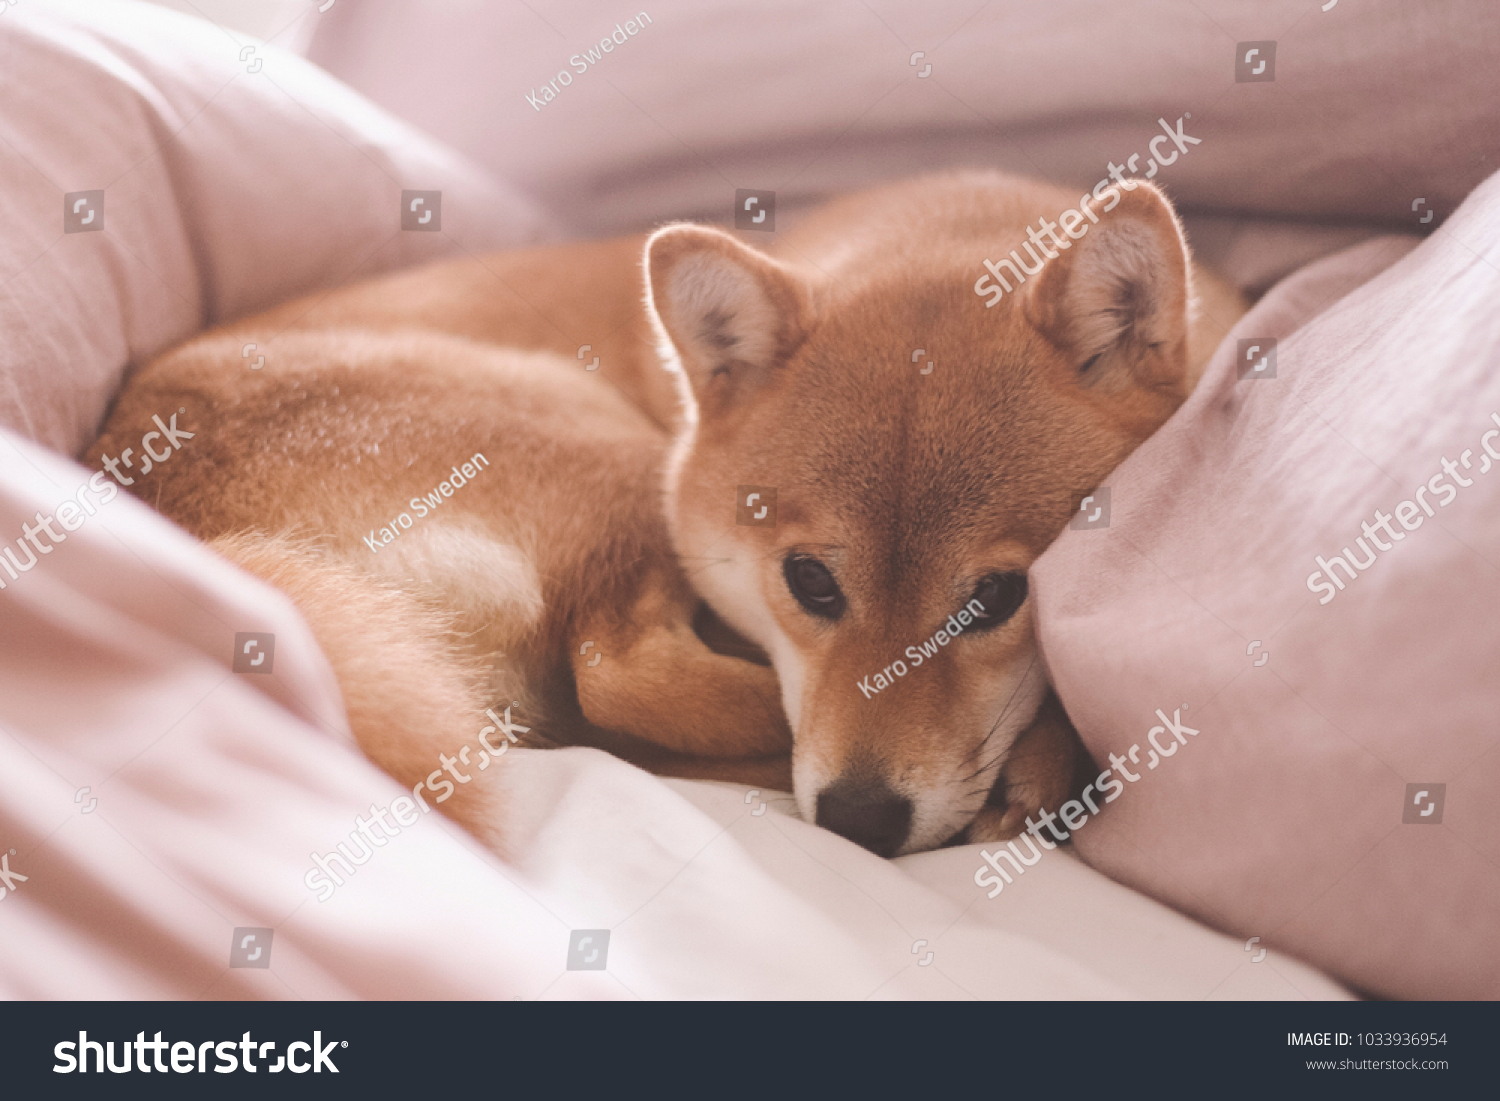 Cute female pedigree shiba inu dog with red fur sleeping in human bed with pink sheets, closeup with natural light from window. Dreamy peaceful. #1033936954